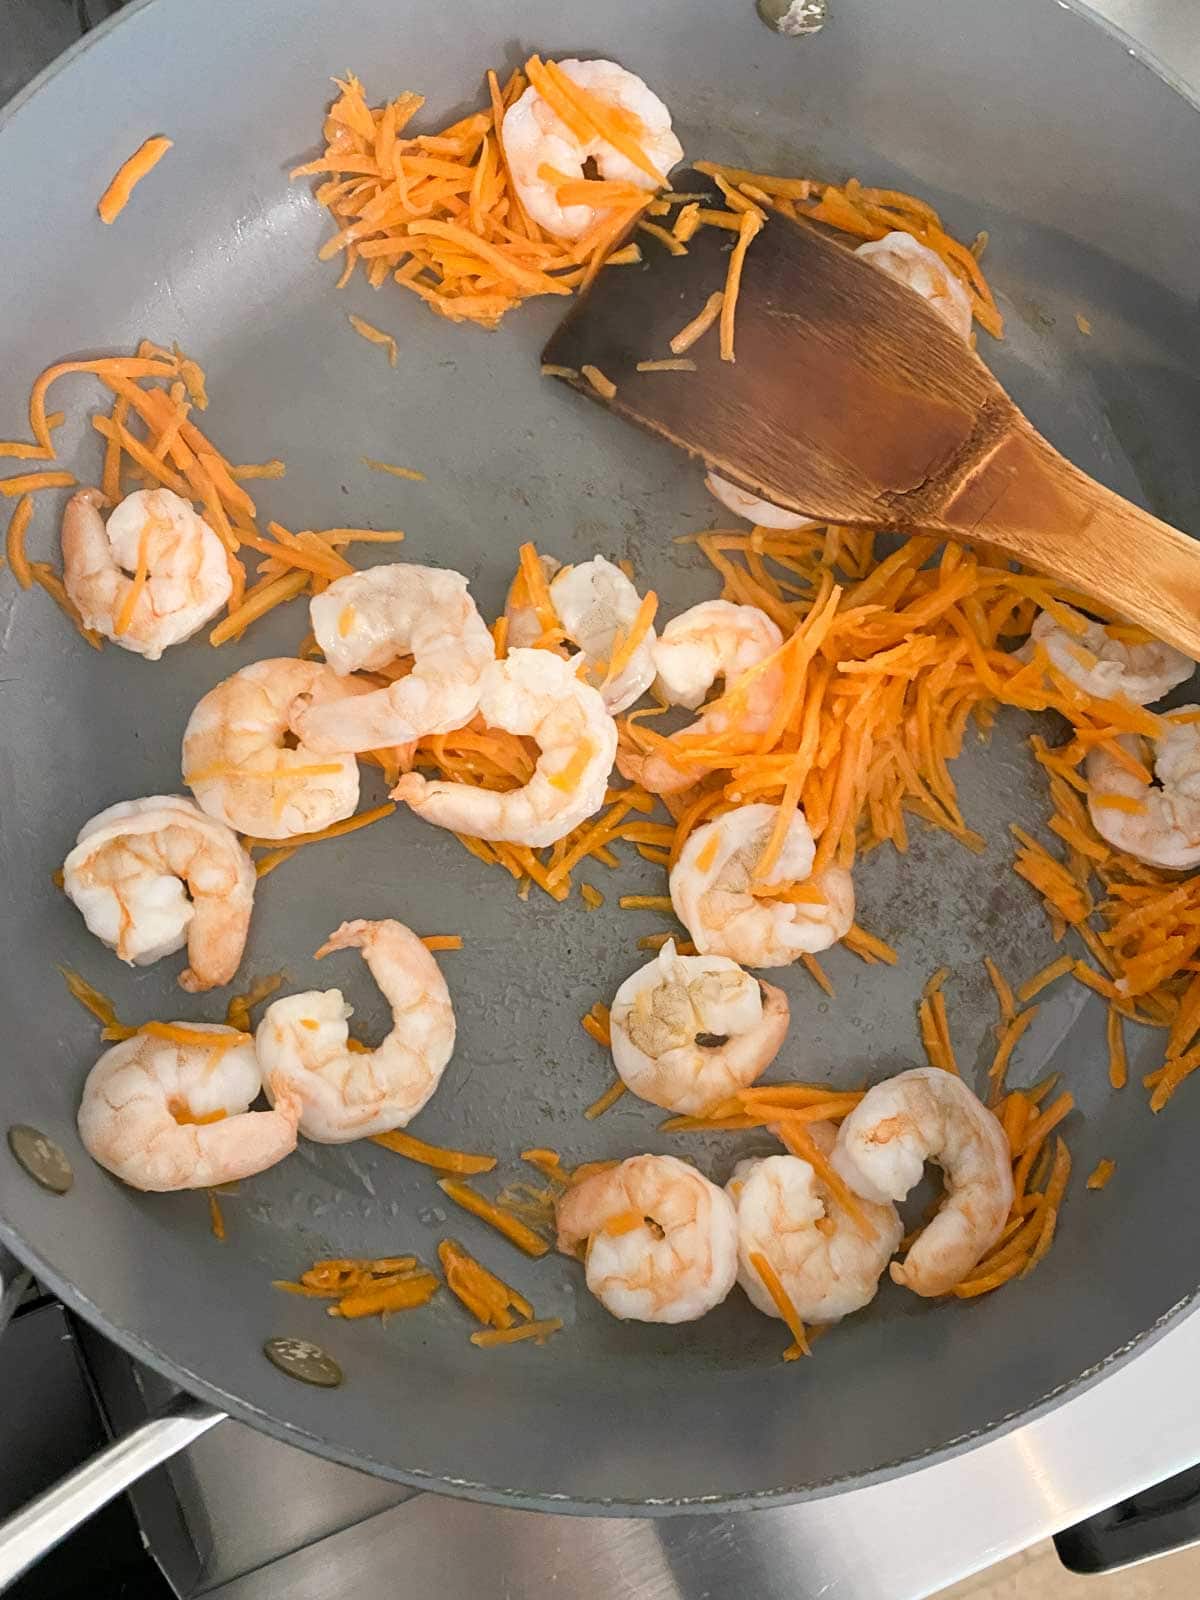 Cooking shrimp and vegetables in a big pan.